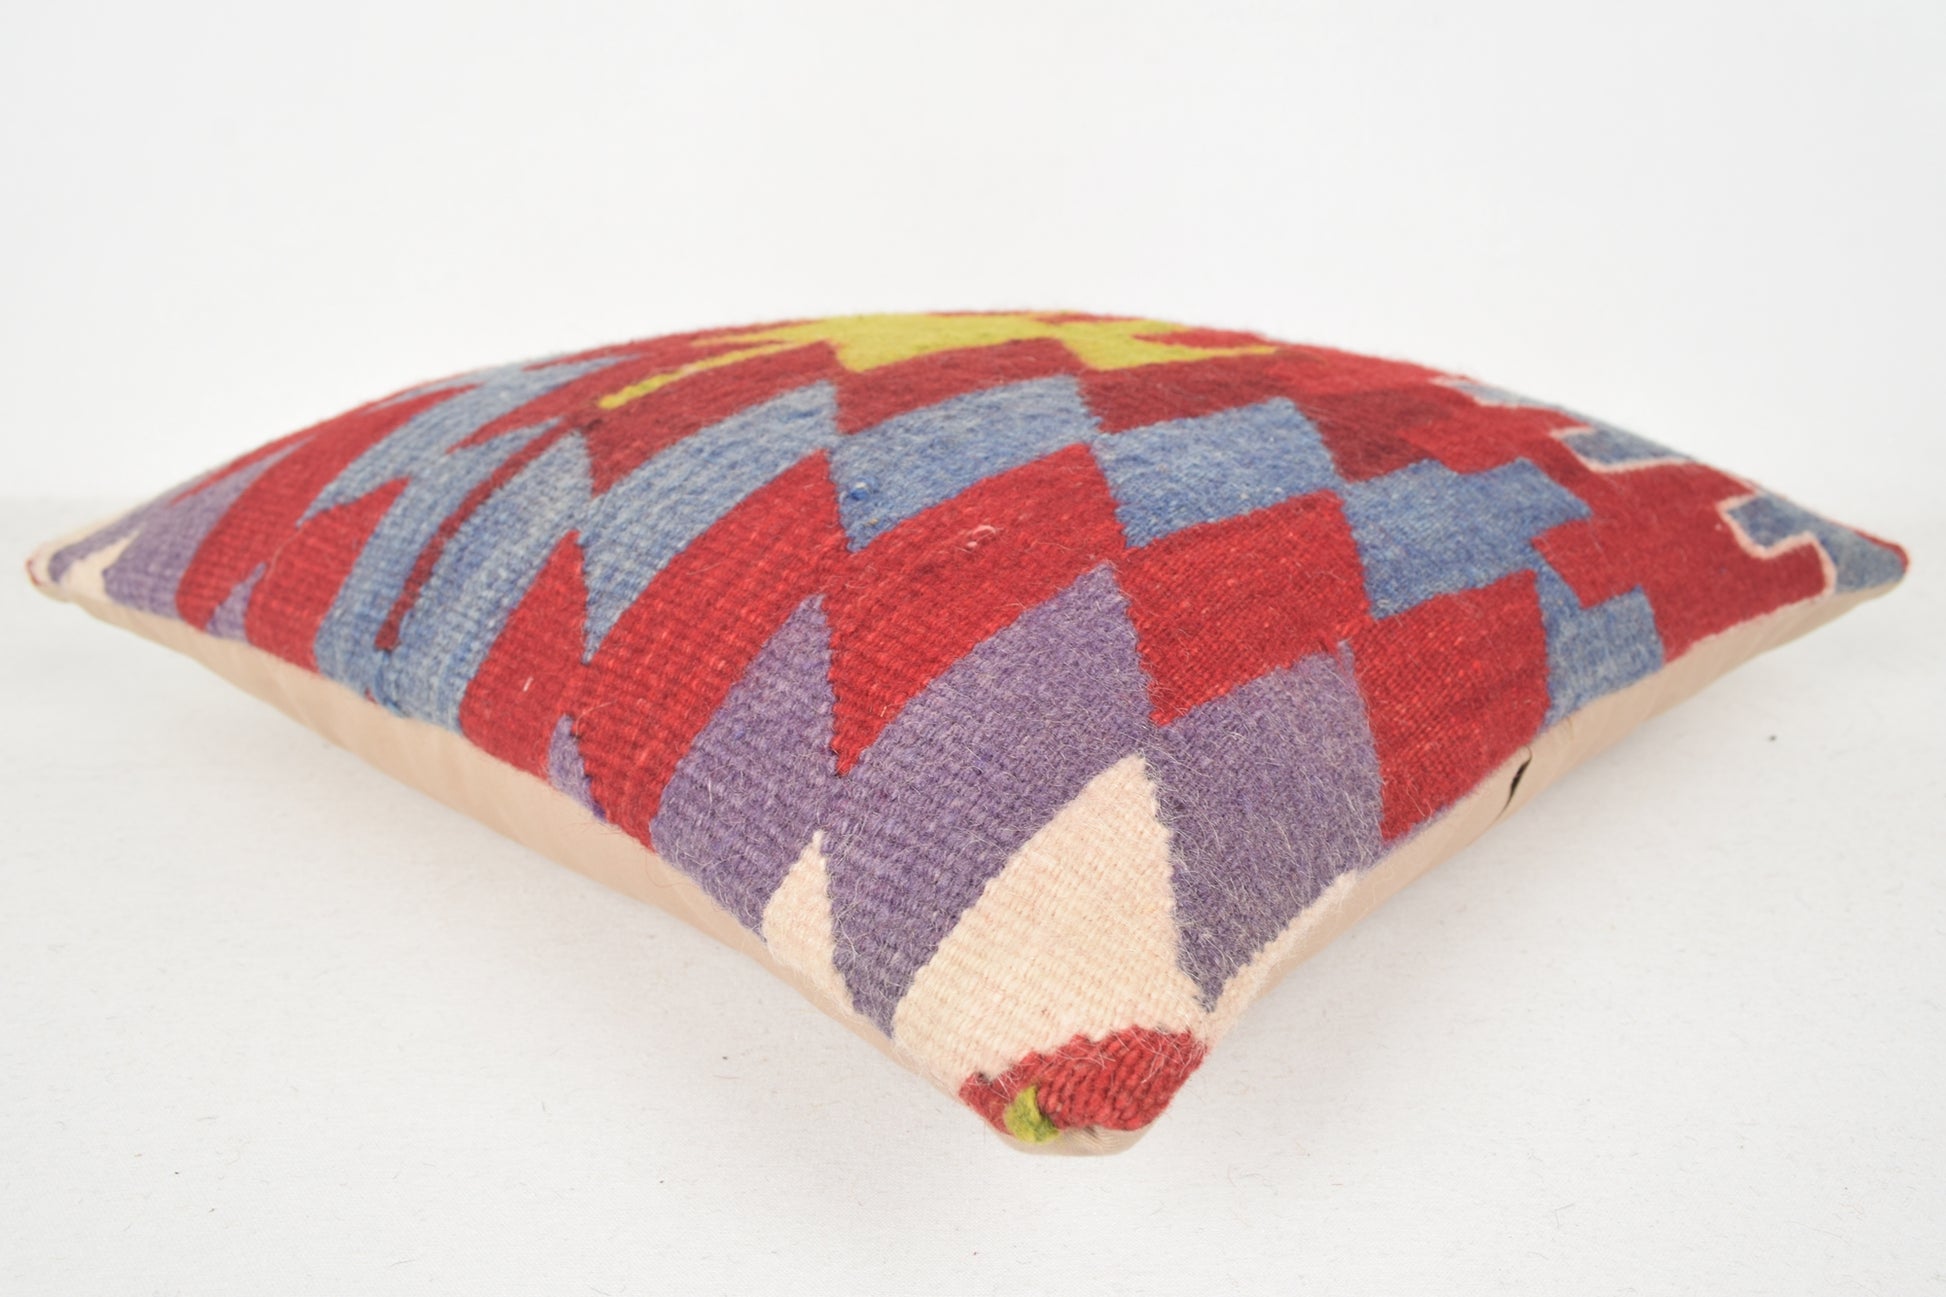 Blue Red Green Kilim Pillow Covers for sale C00388 18x18 " - 45x45 cm.